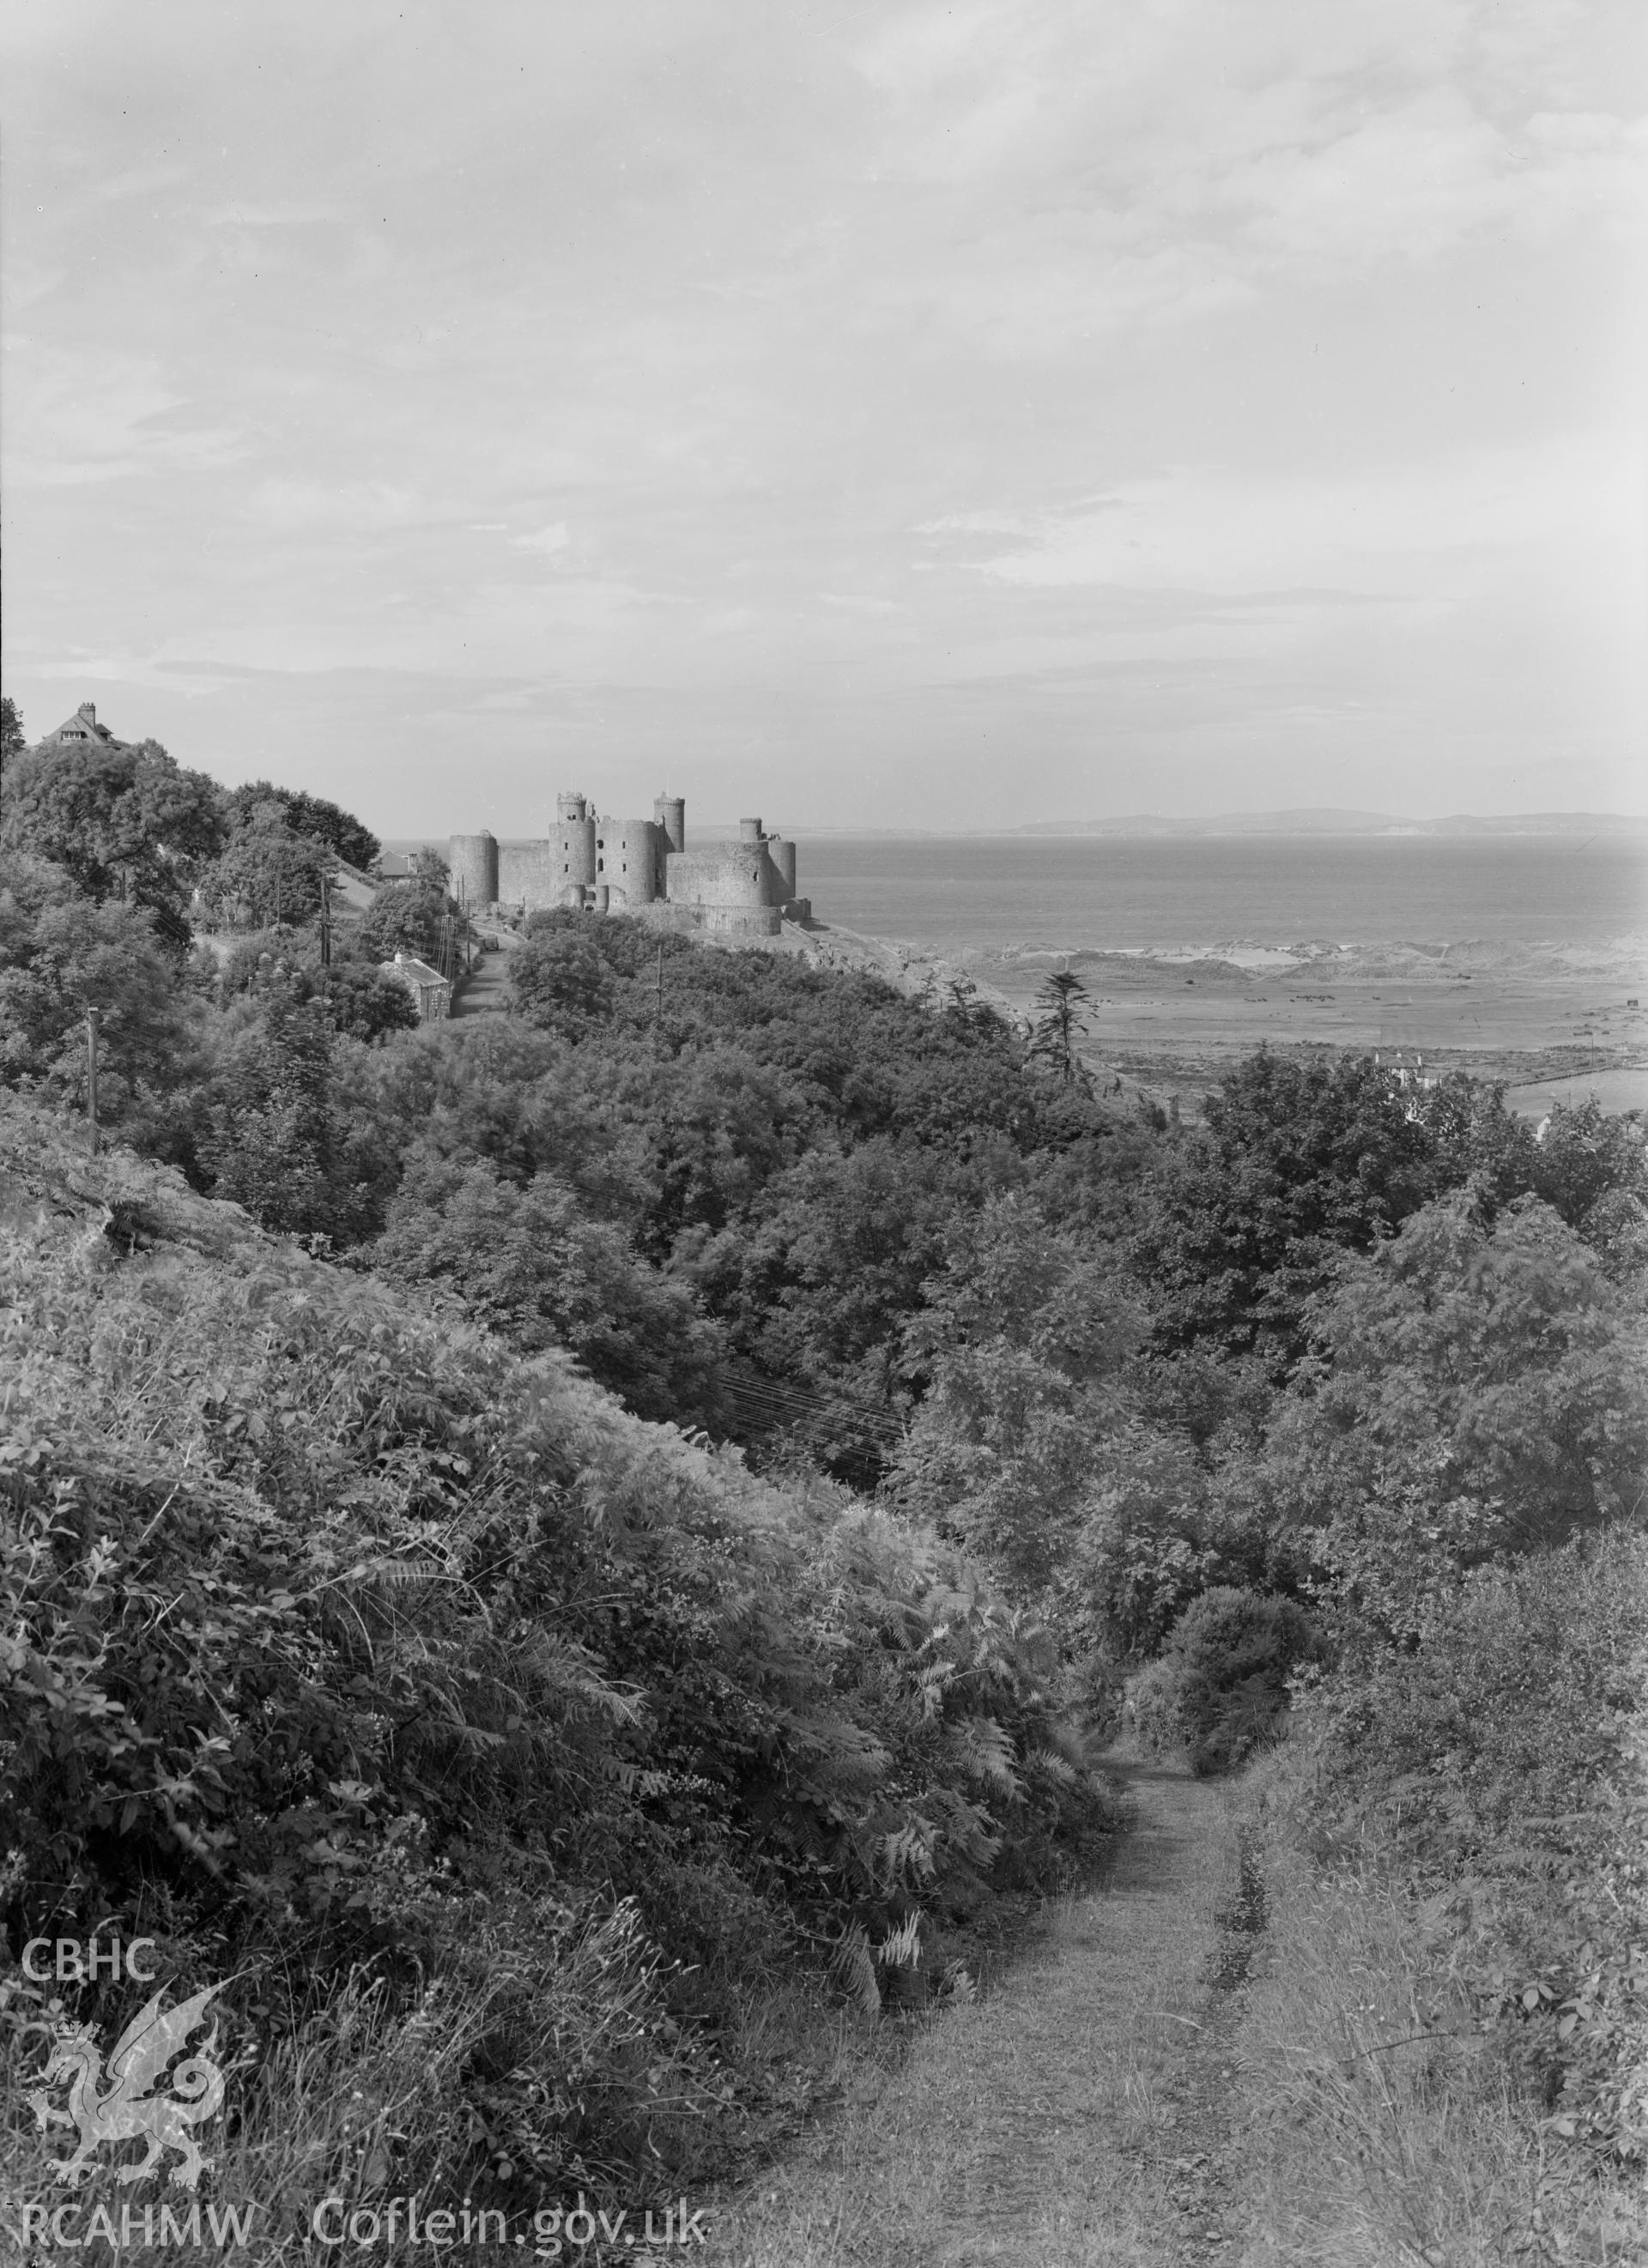 Digital copy of a negative showing view of Harlech Castle.